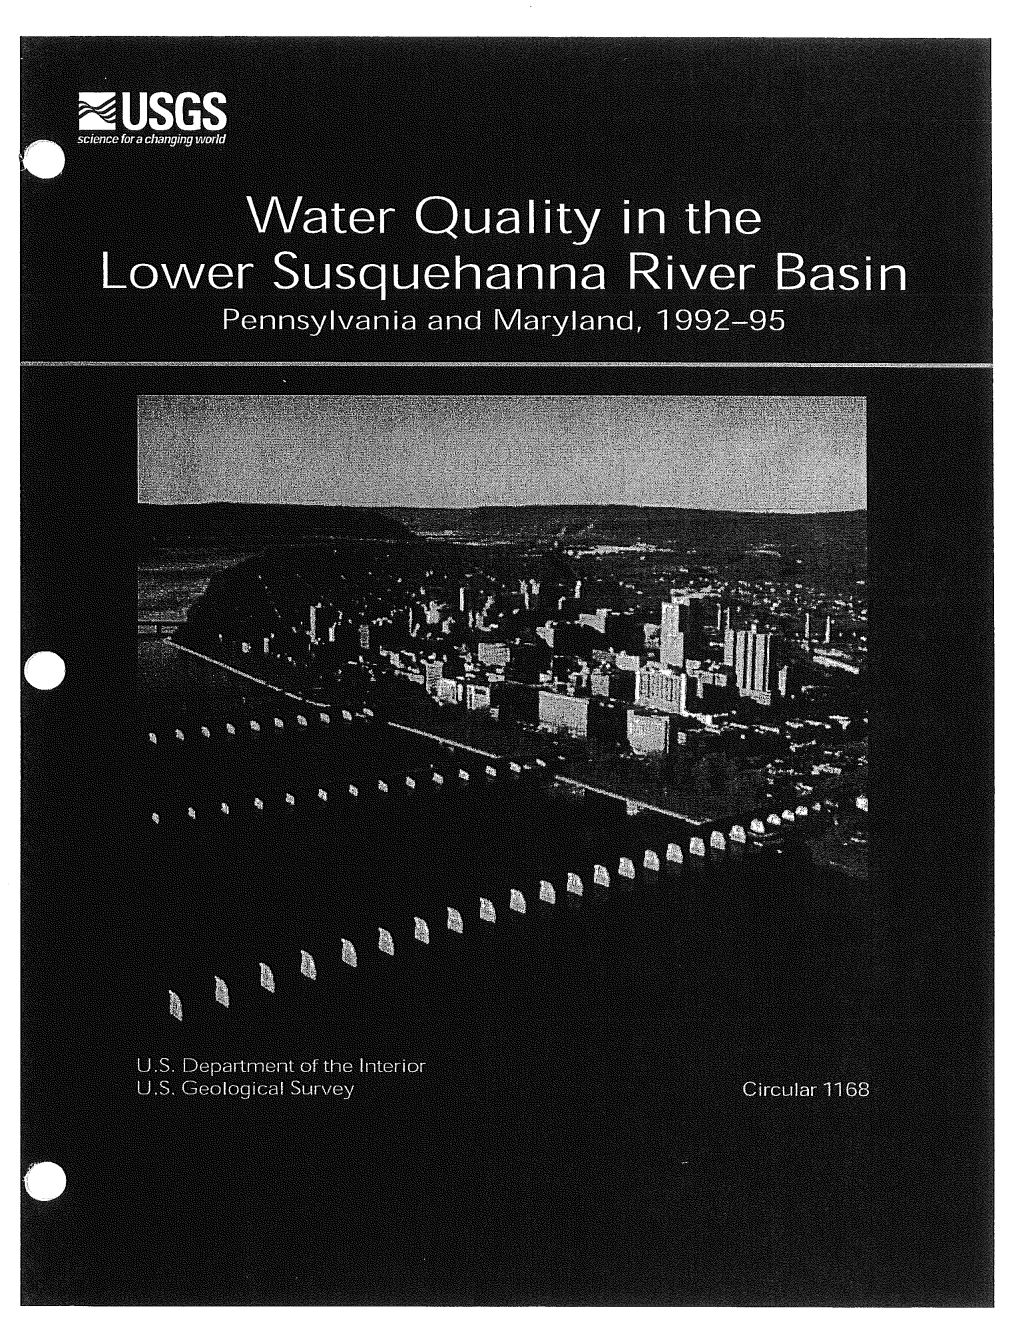 Water Quality in the Lower Susquehanna River Basin